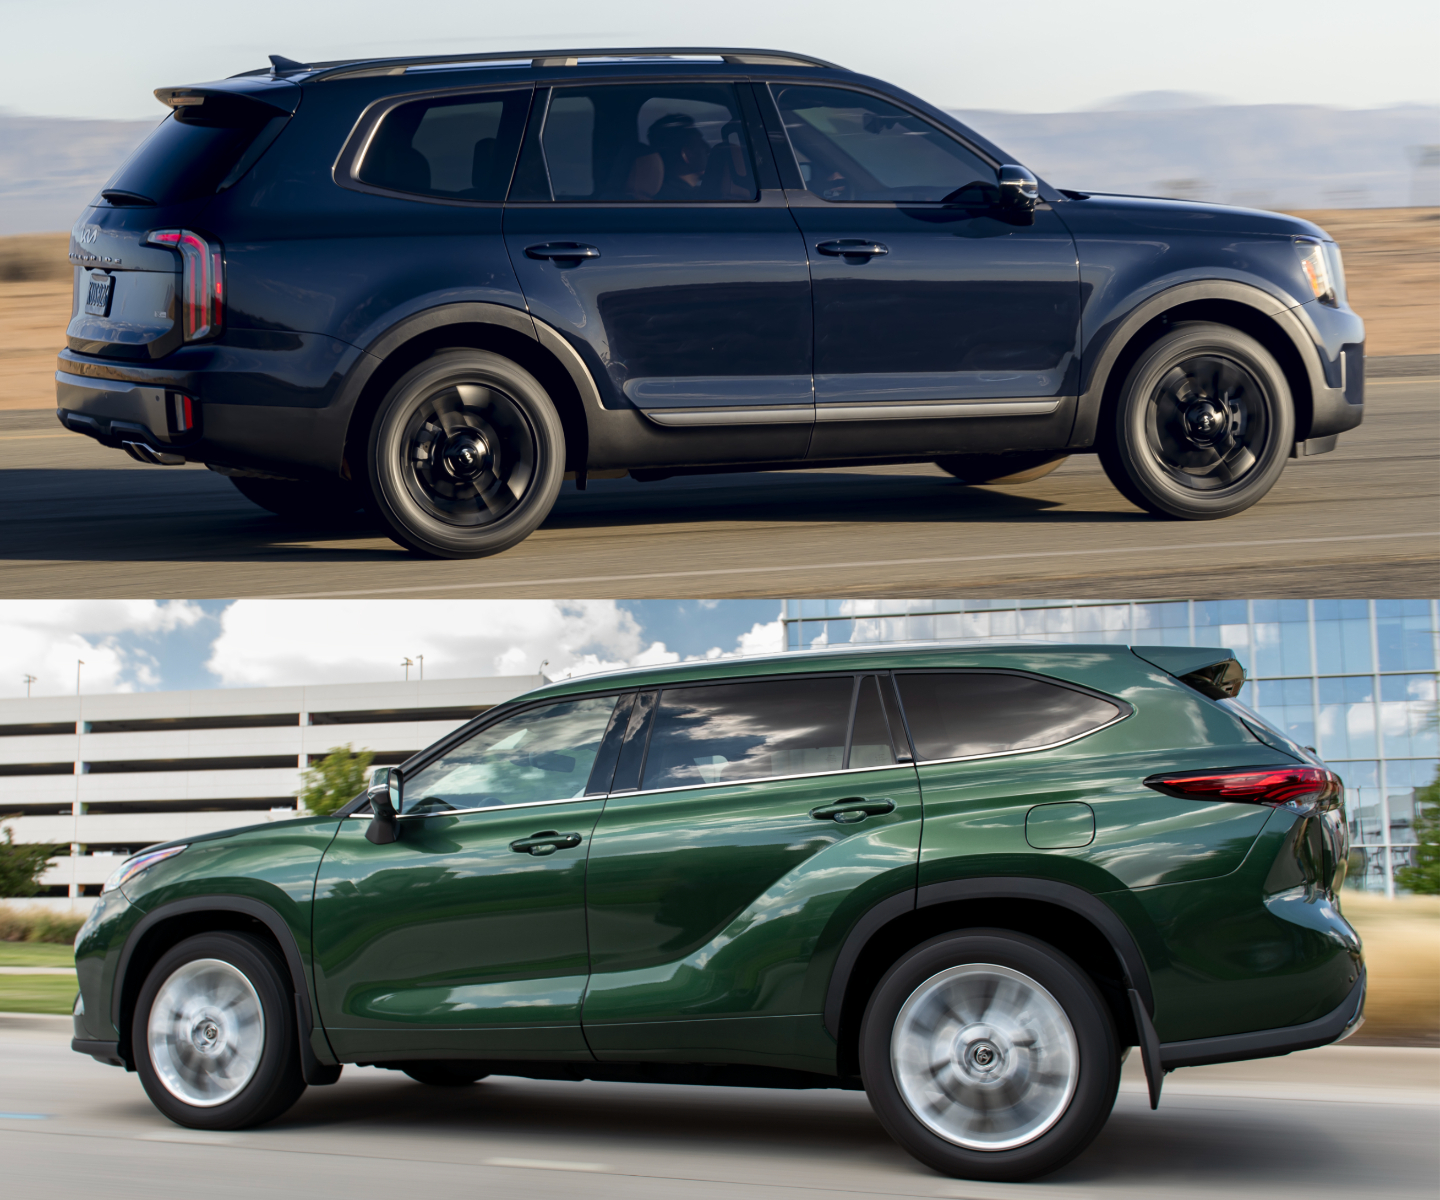 The 2023 Kia Telluride and the 2023 Toyota Highlander